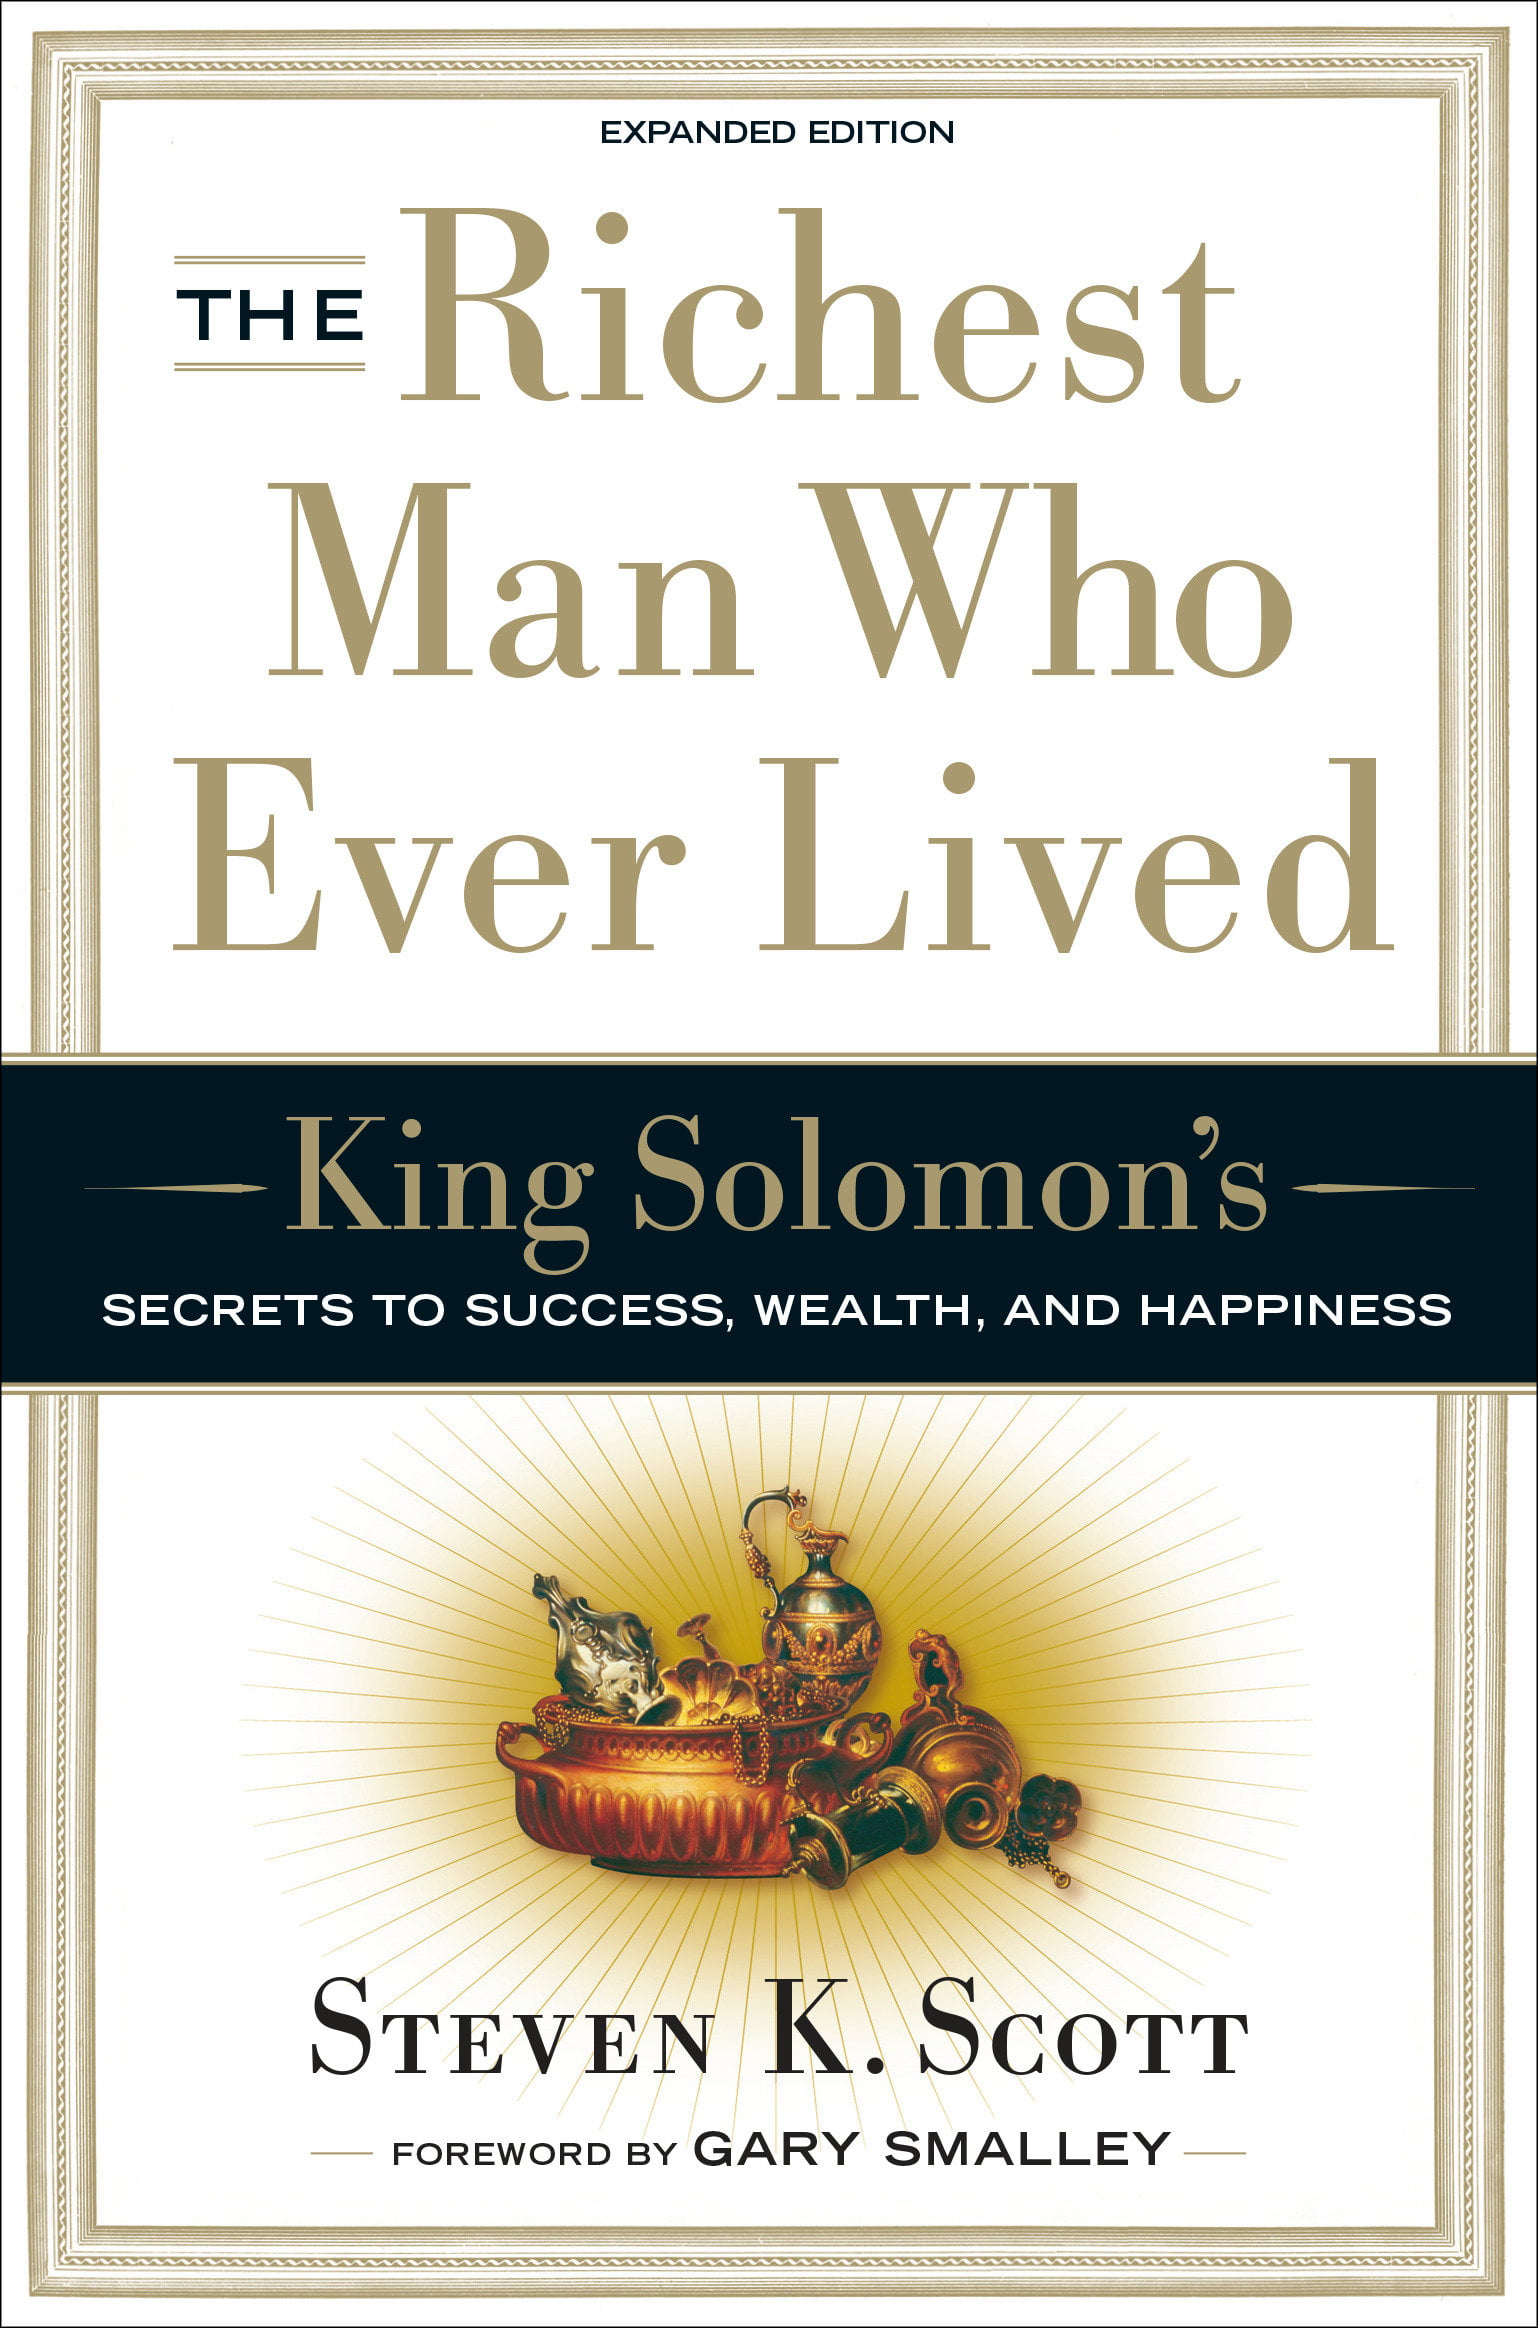 The Richest Man Who Ever Lived King Solomons Secrets to Success Wealth
and Happiness Epub-Ebook